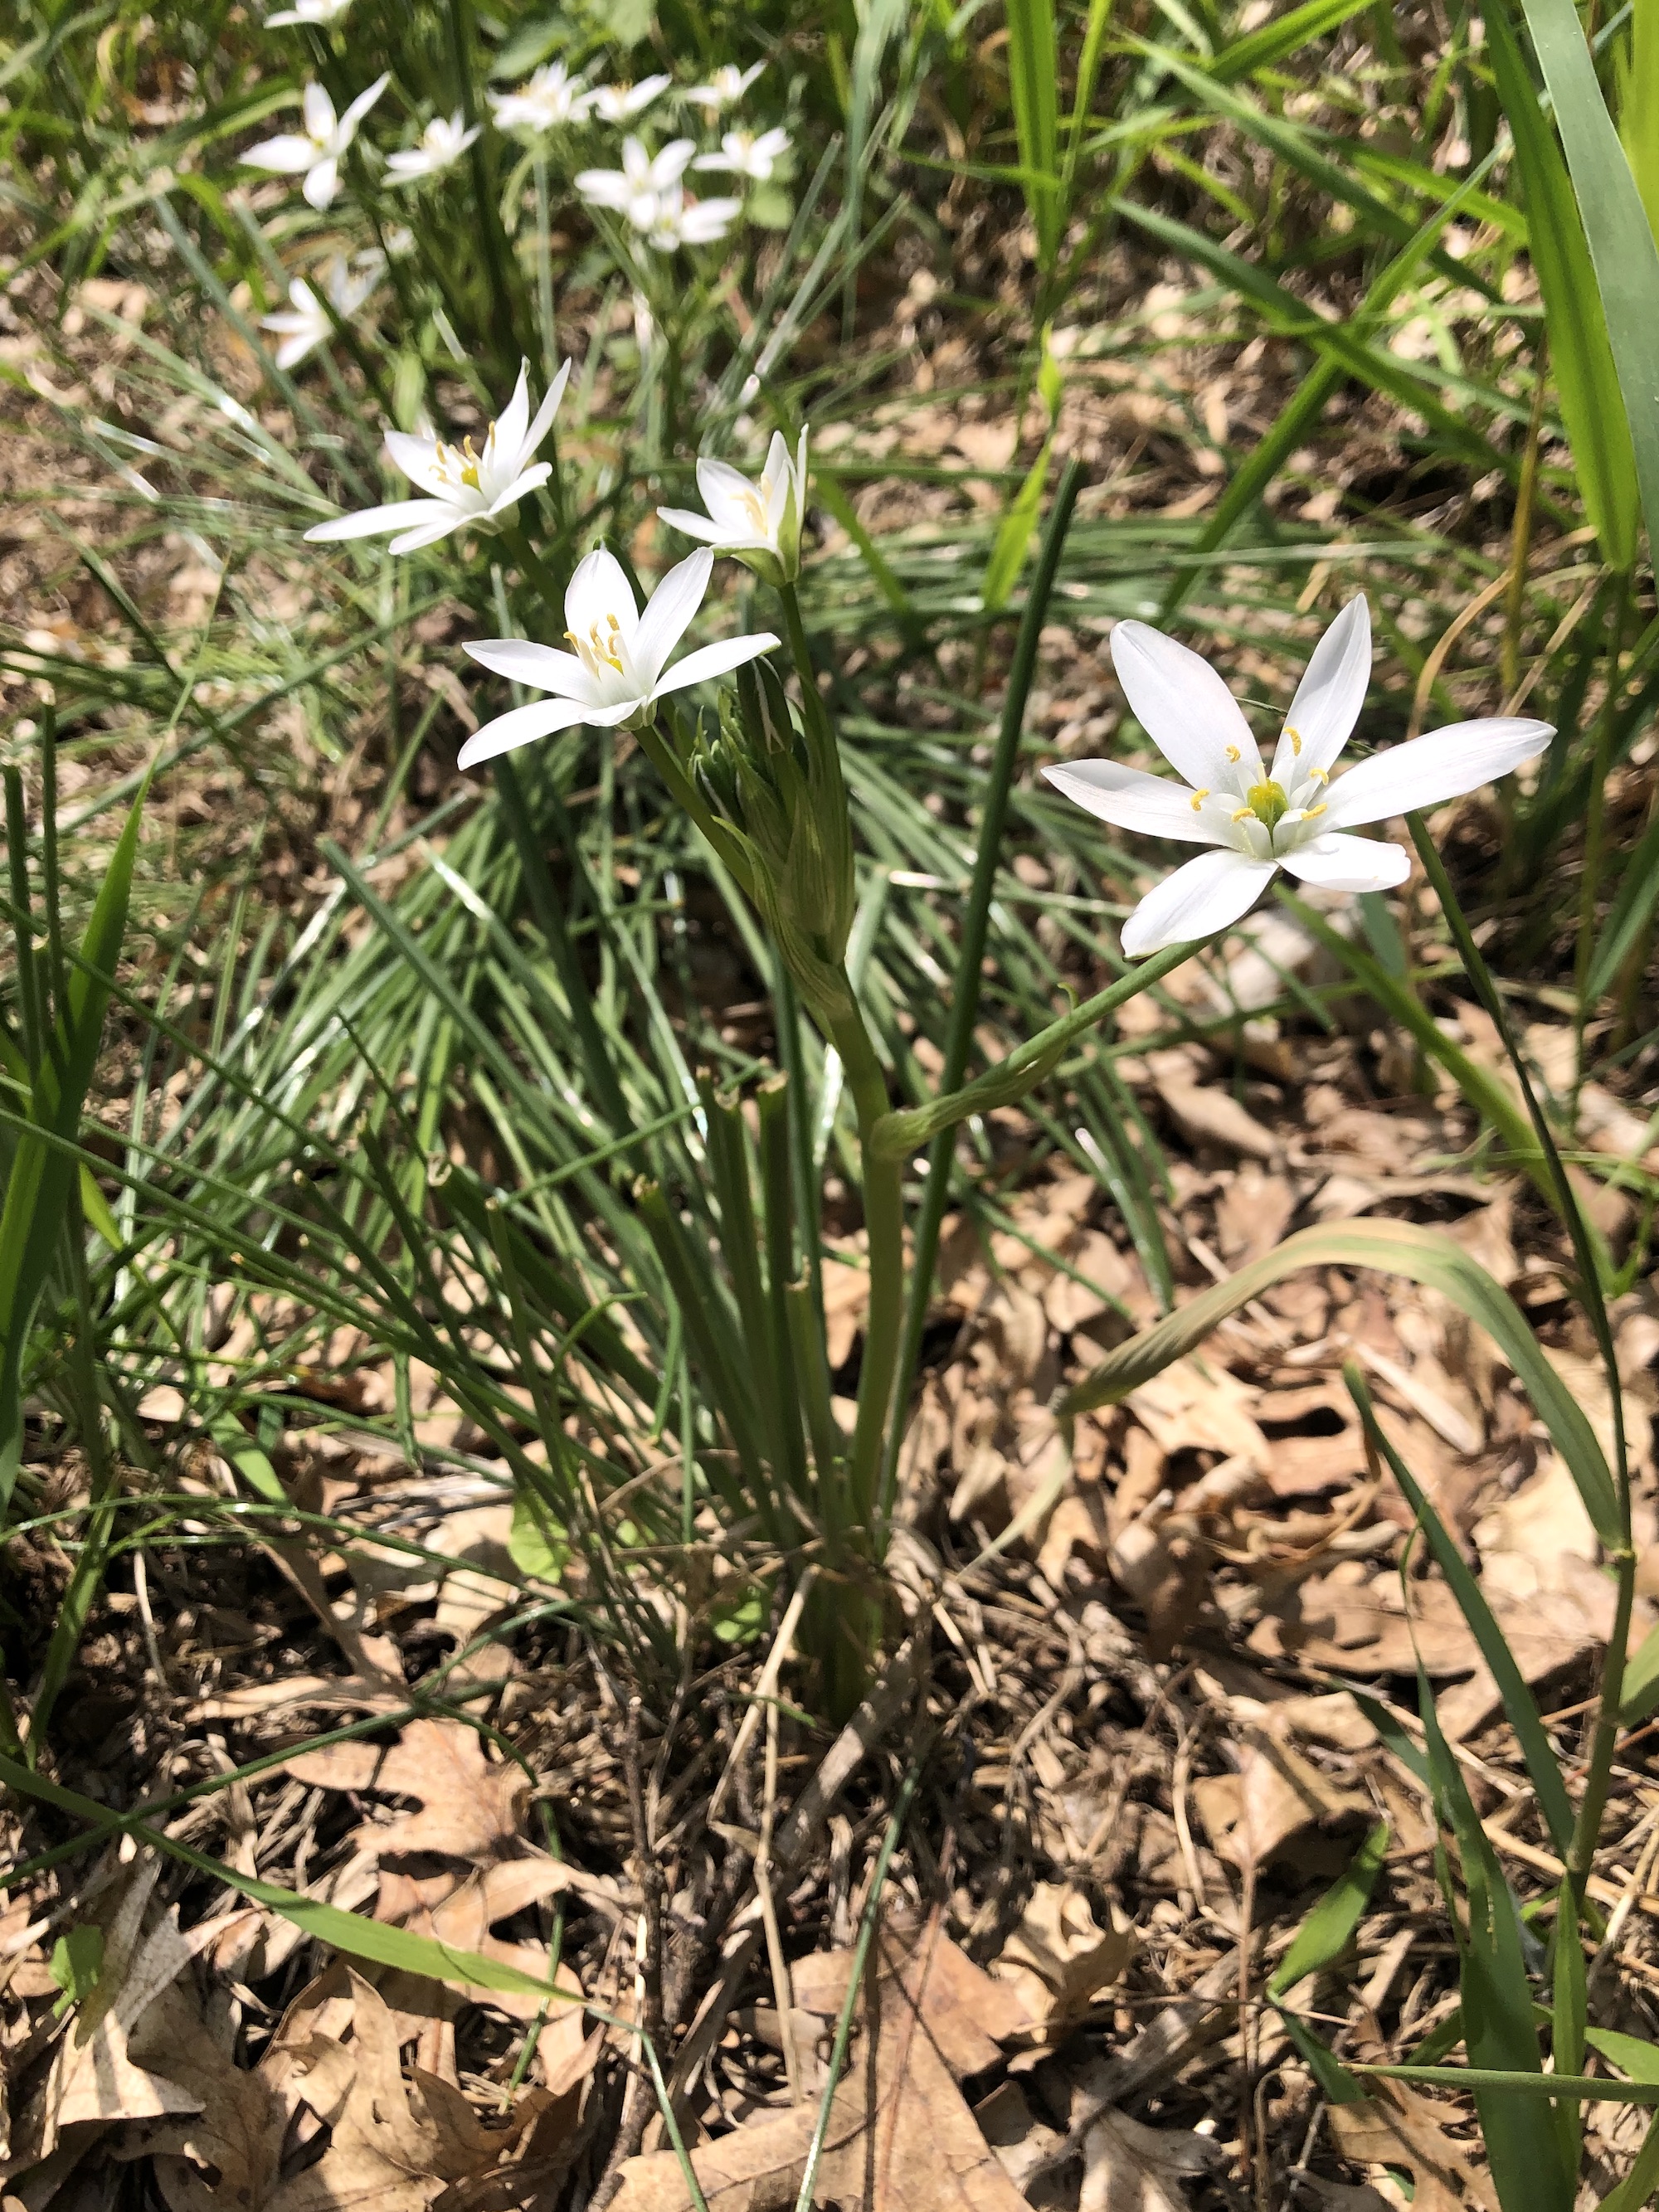 Star-of-Bethlehem along bike path behind Gregory Street in Madison, Wisconsin on May 23, 2022.